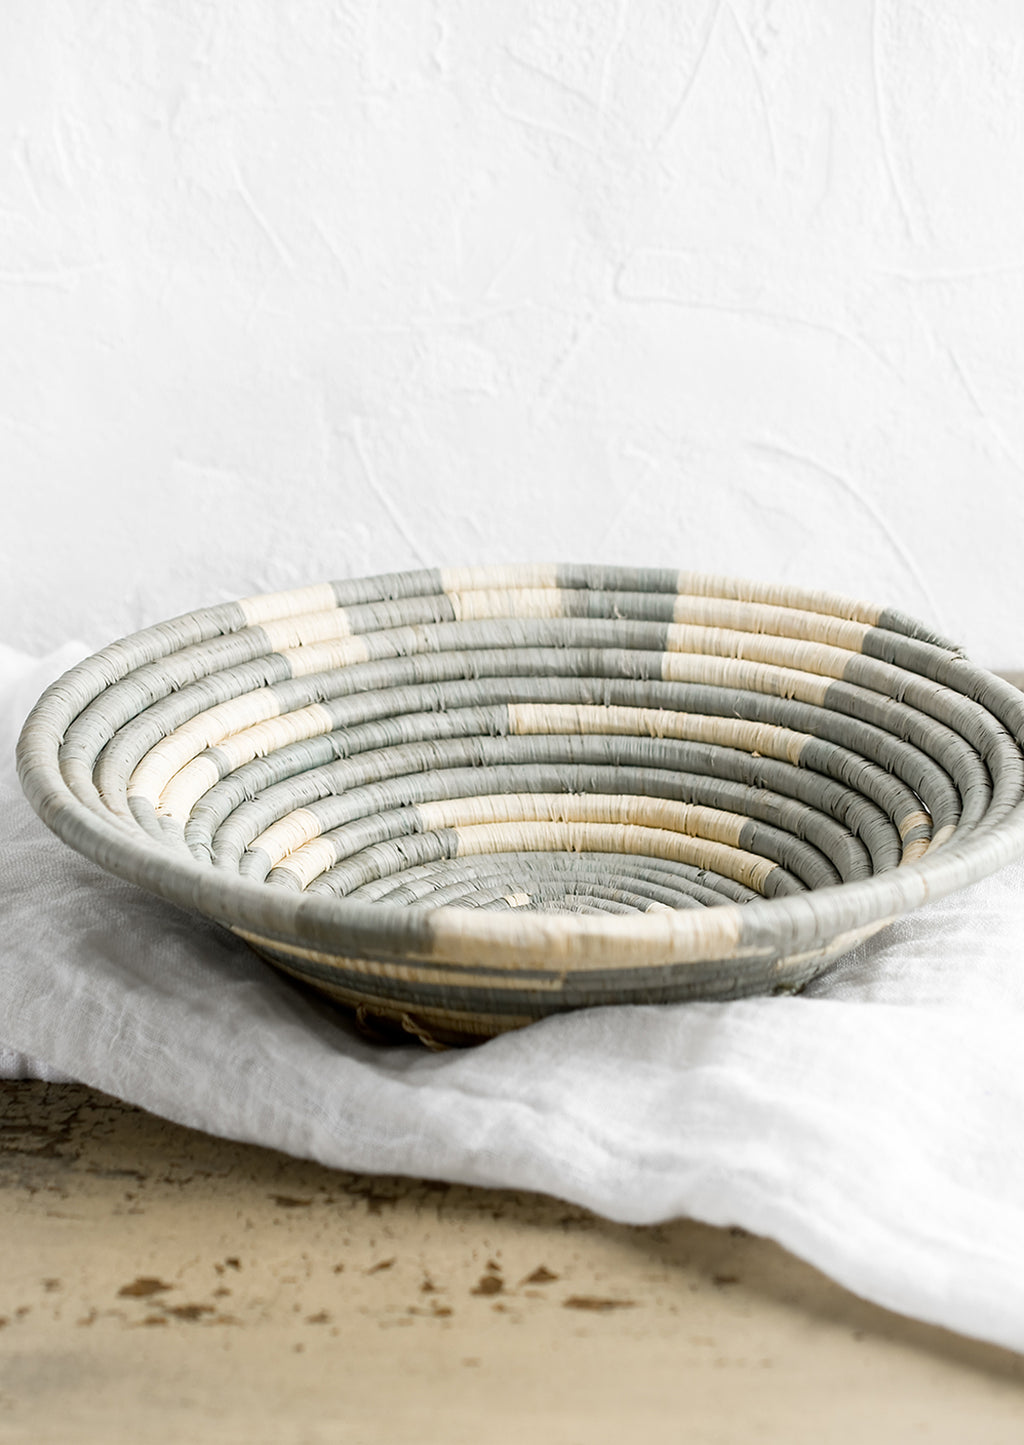 2: A round raffia bowl in dusty blue-grey and natural spiral geometric pattern.